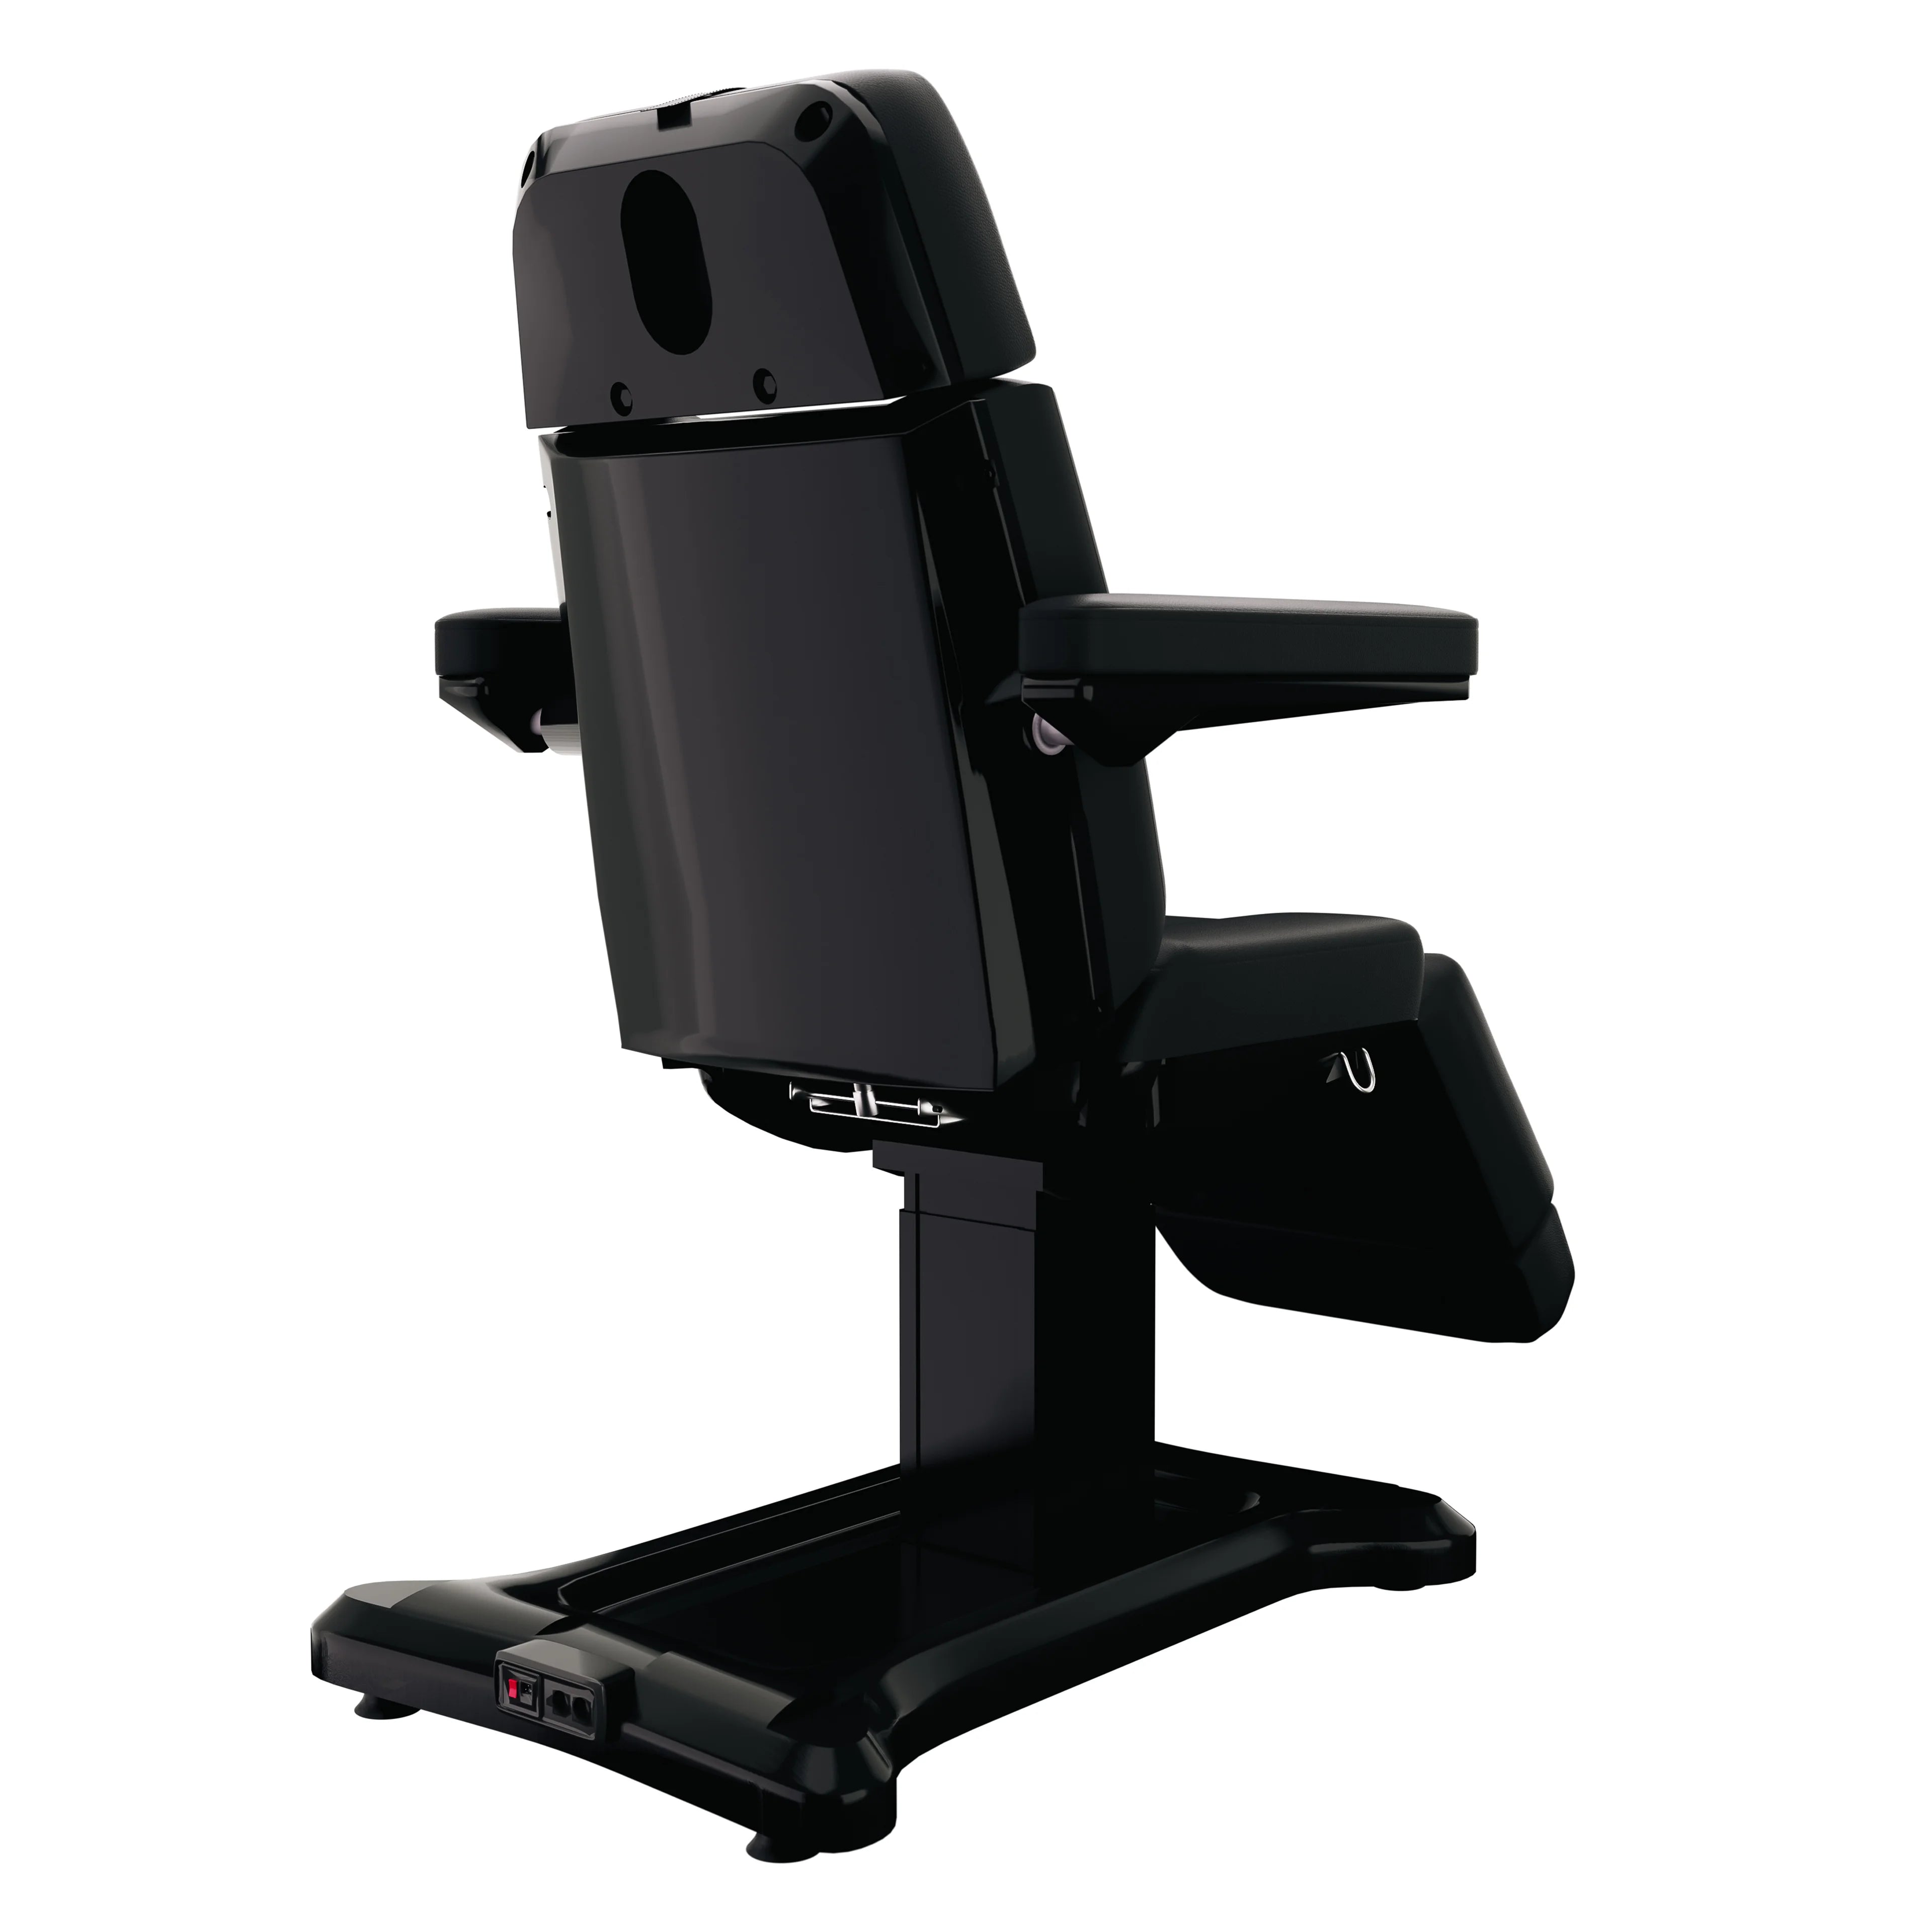 SpaMarc . Tomar (ALL Black) . 3 Motor Spa Treatment Chair / Bed